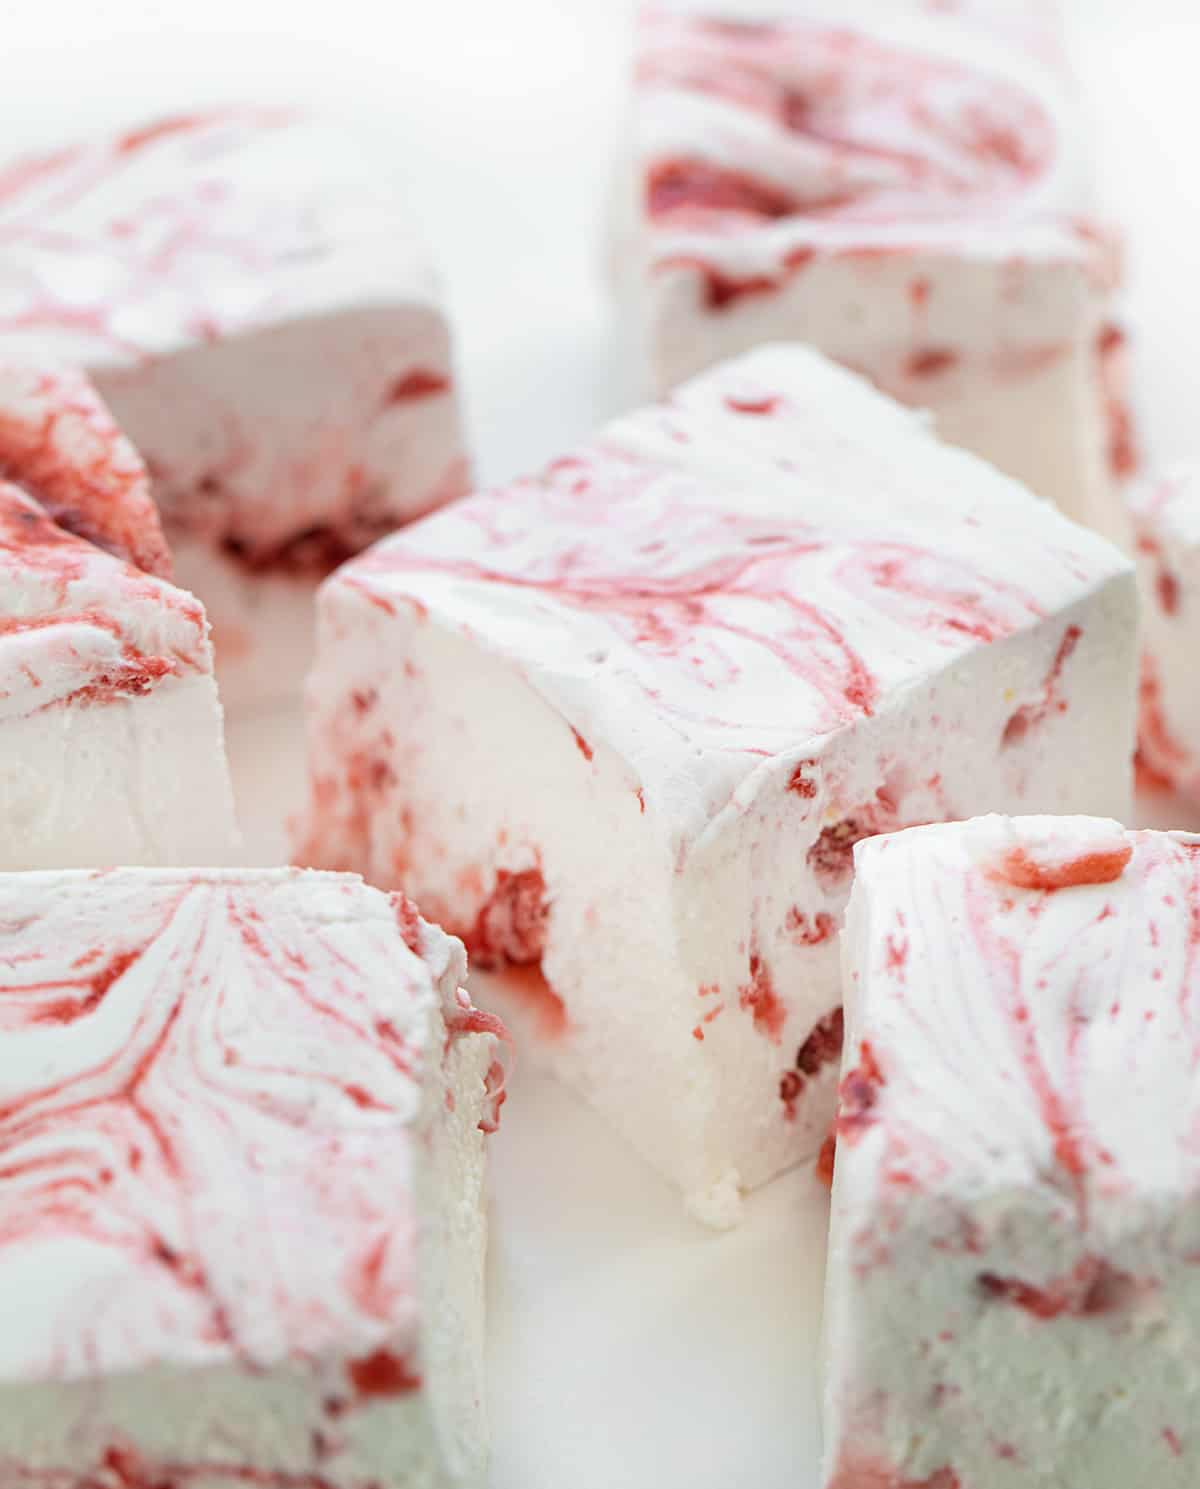 Cut up Strawberry Marshmallows on a White Counter.